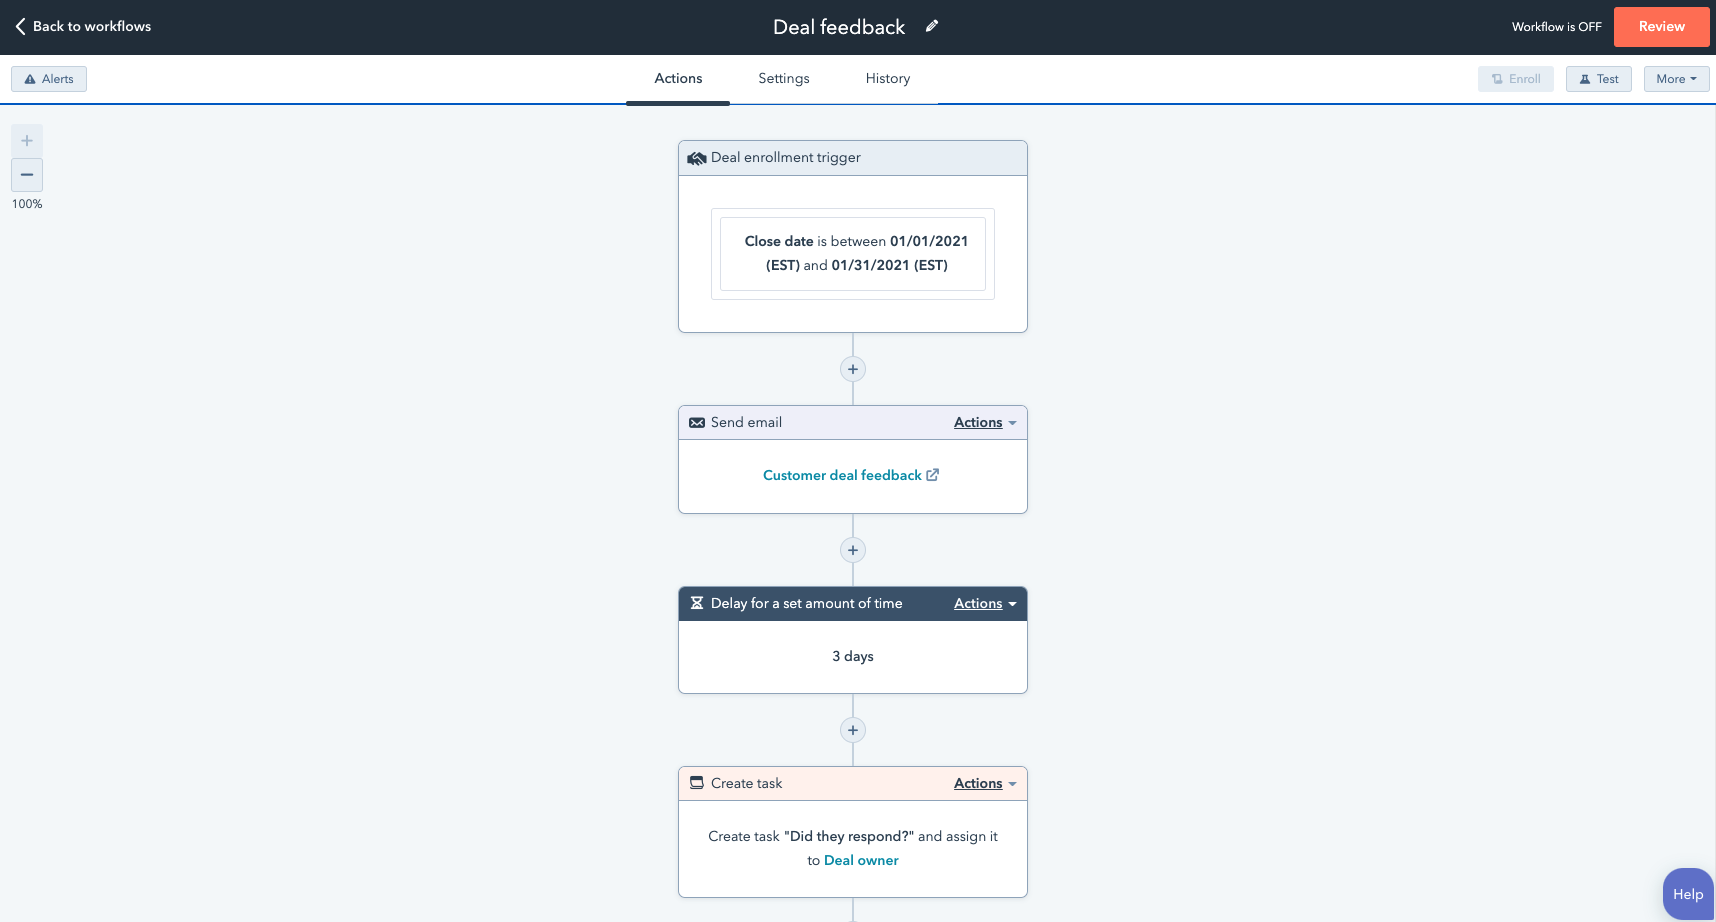 Example of deal feedback workflow